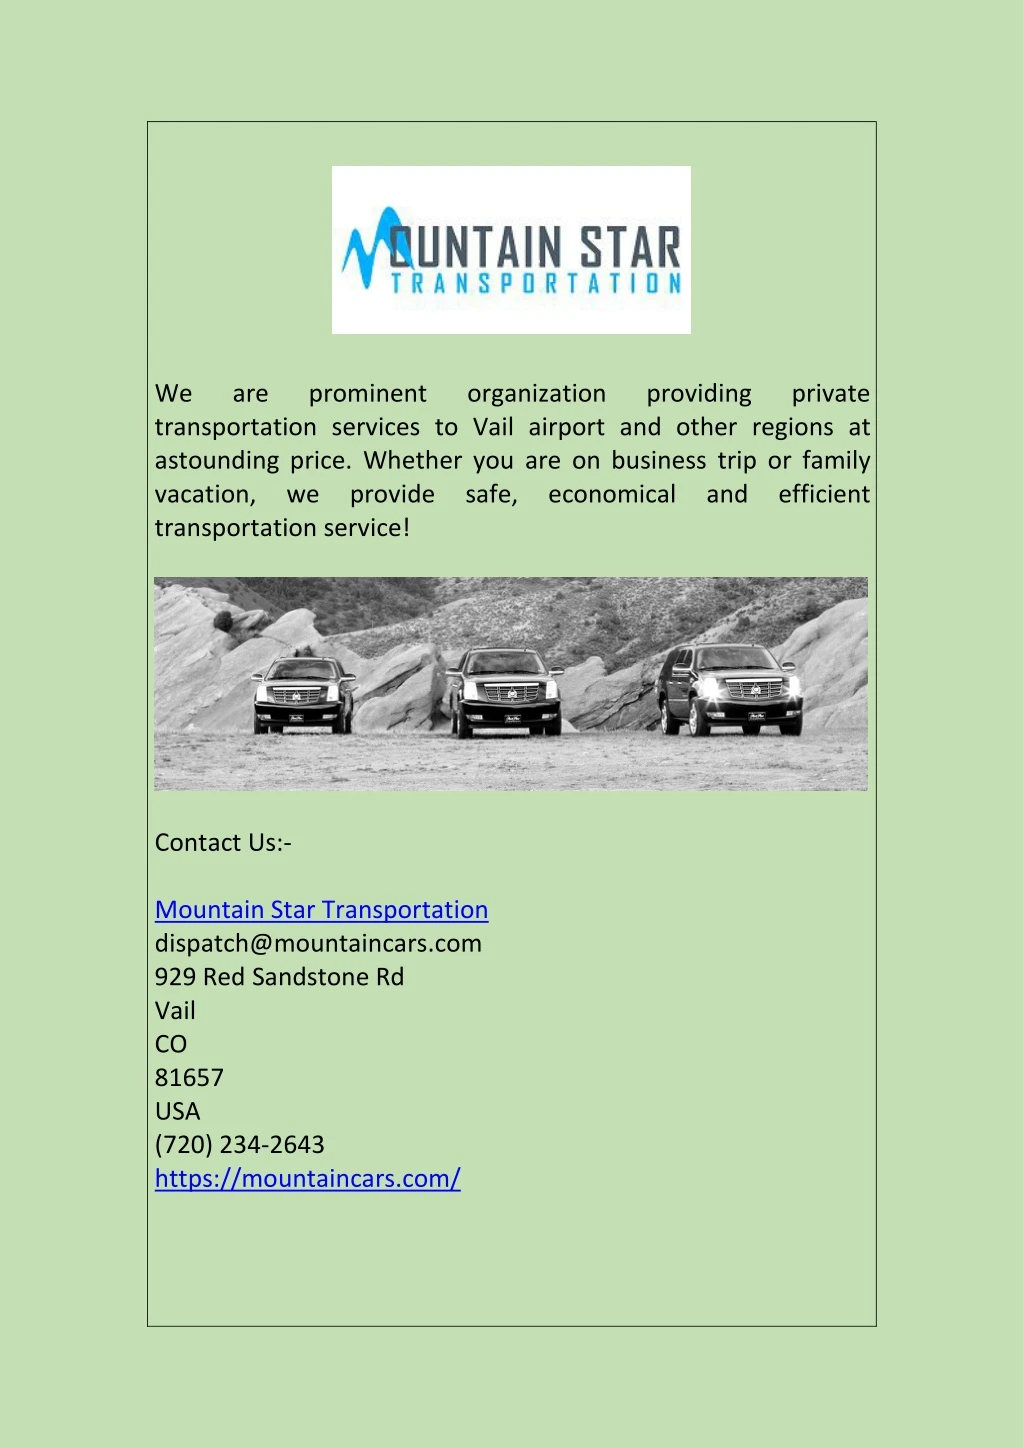 we transportation services to vail airport